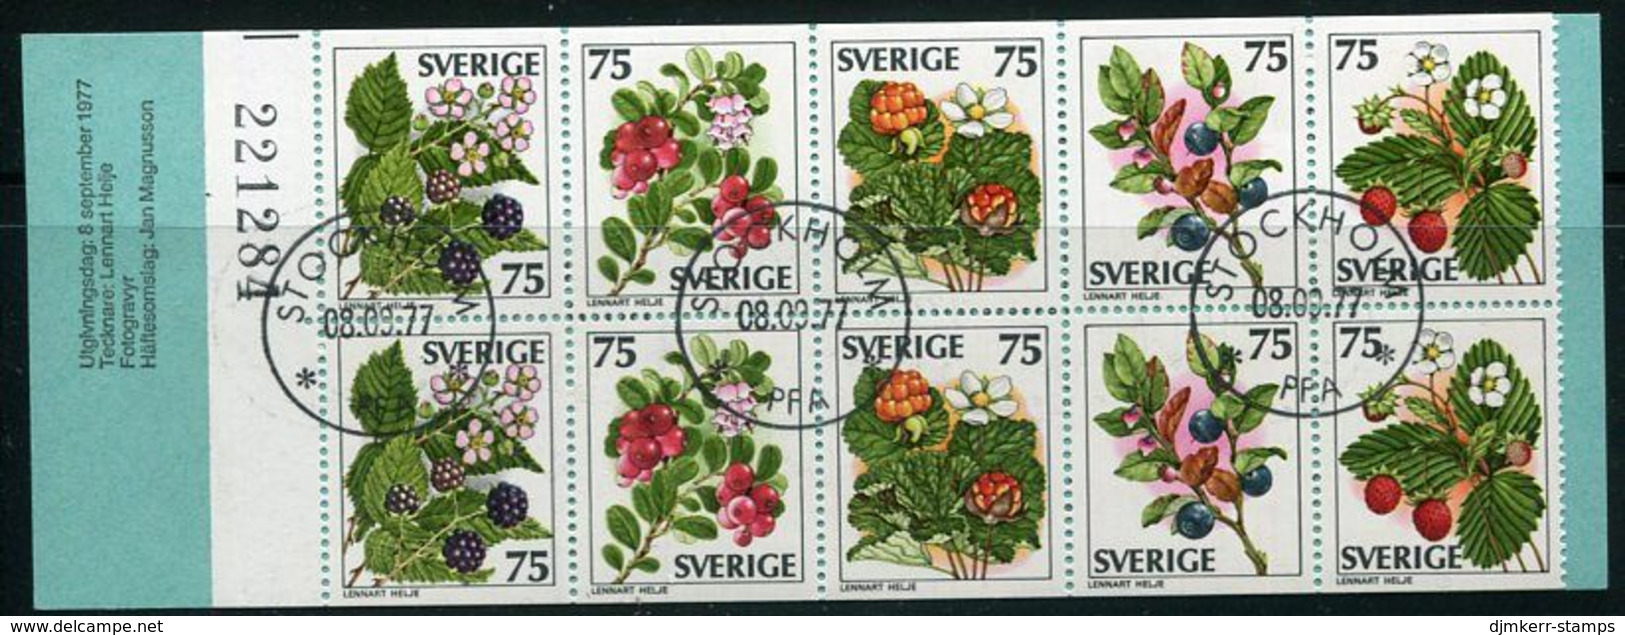 SWEDEN 1977 Wild Berries Booklet Used.  Michel  MH 62 - 1951-80